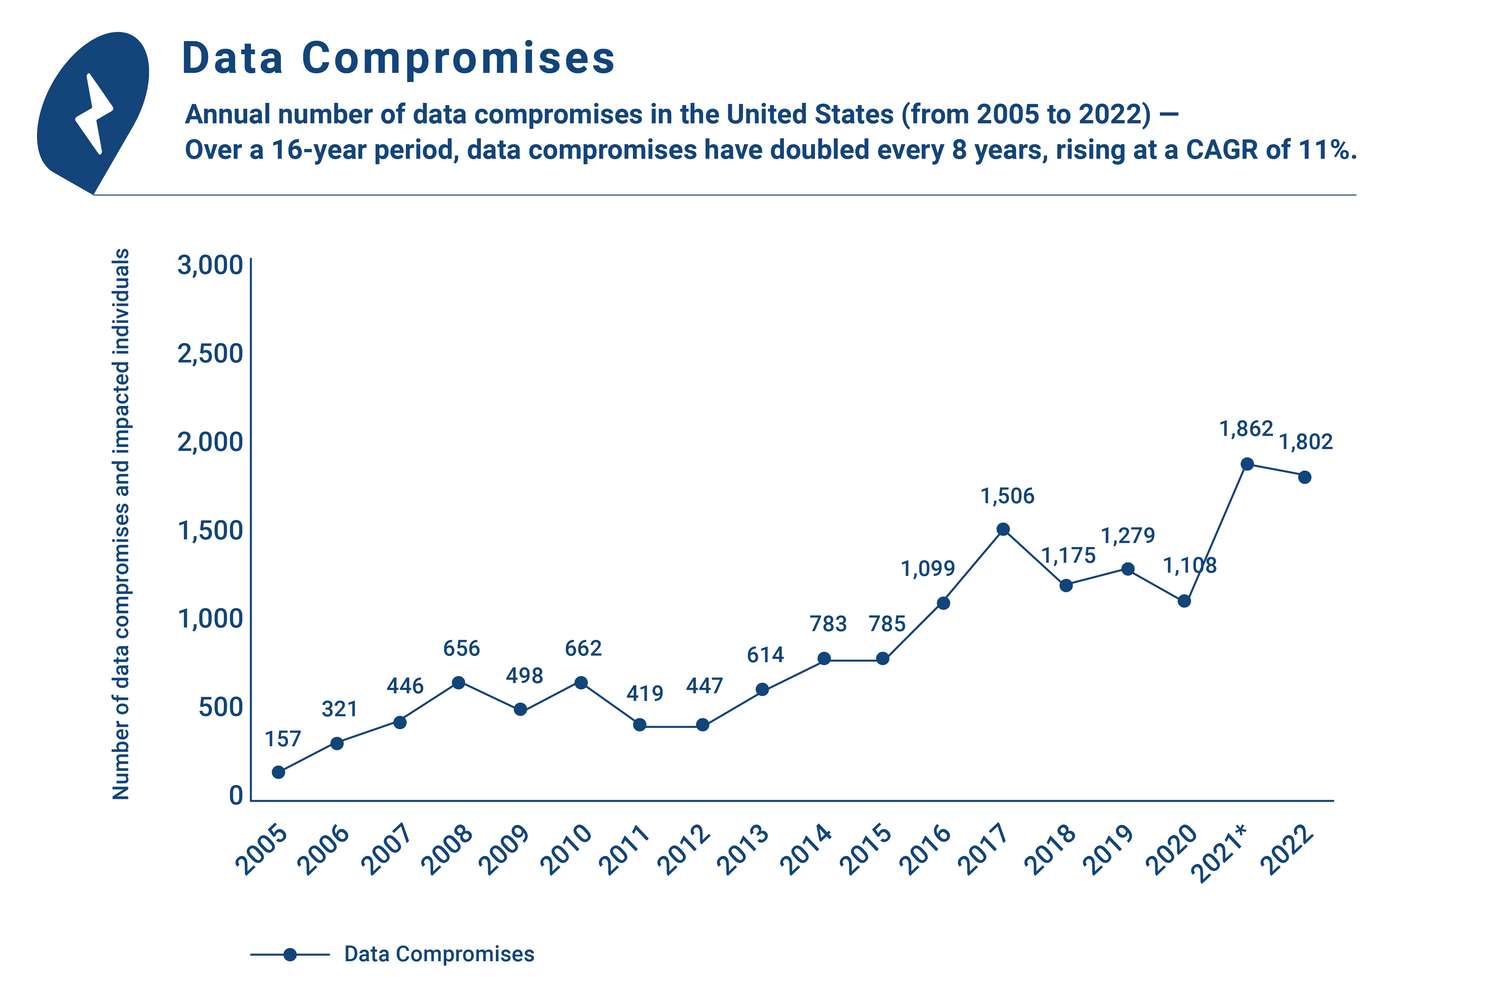 Graph representing the annual number of data compromises in the US over a 16 year period (2005-2022). The graph indicates that data compromises have doubled every 8 years, rising at a CAGR of 11%.